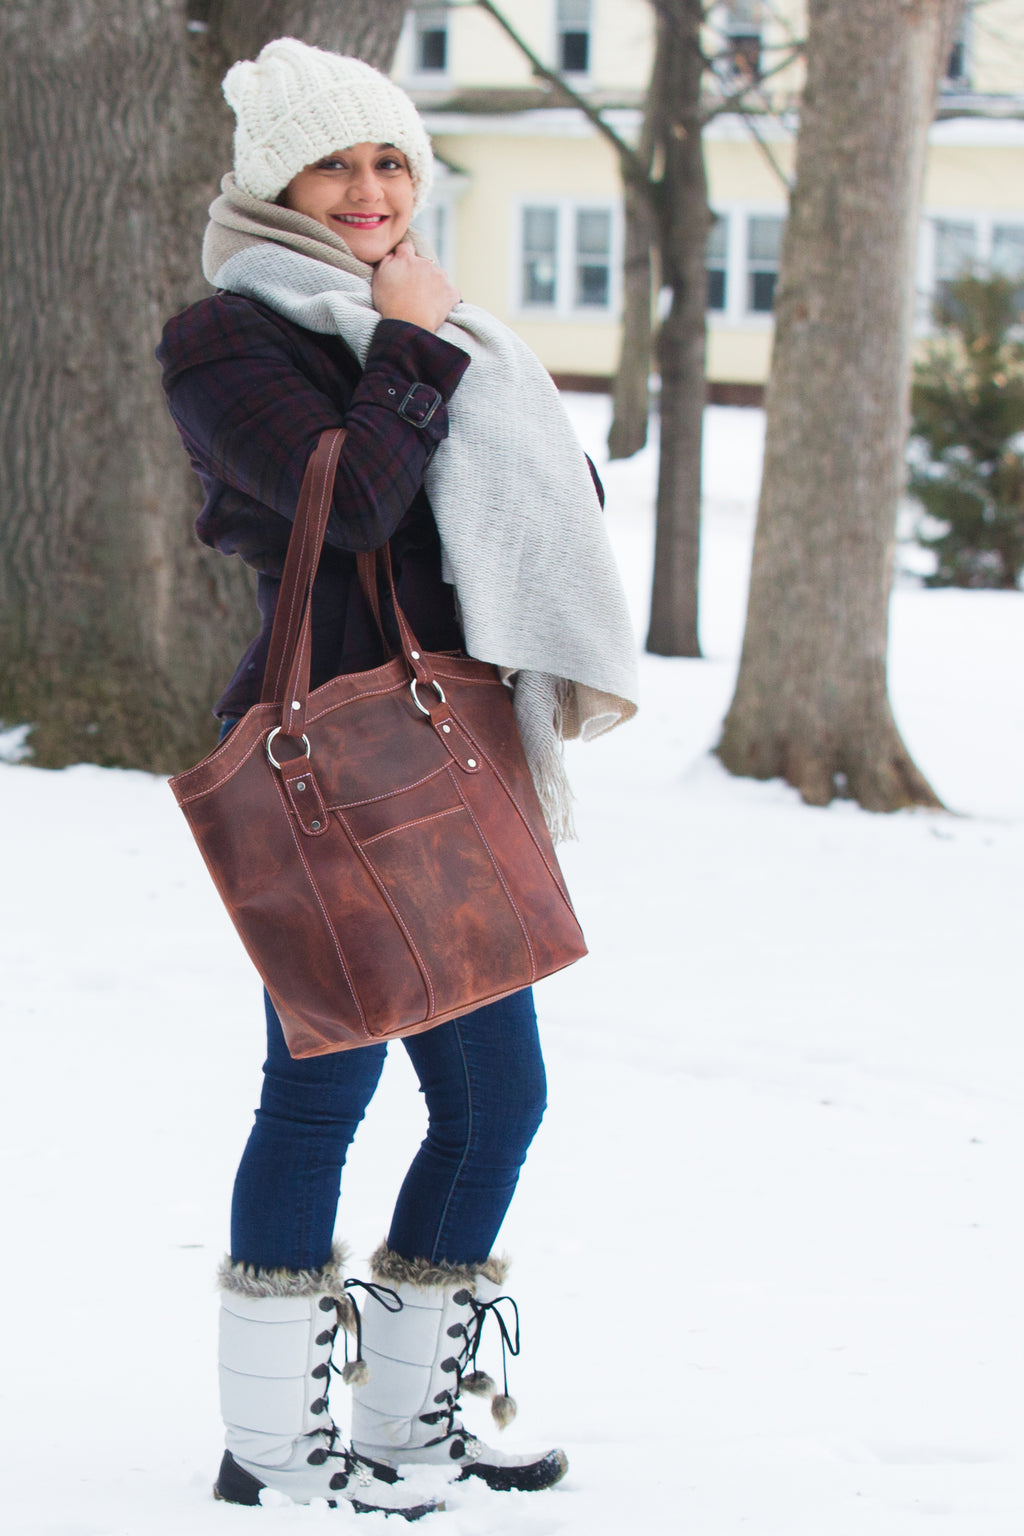 The Tote Bag: A Fashionable and Practical Accessory